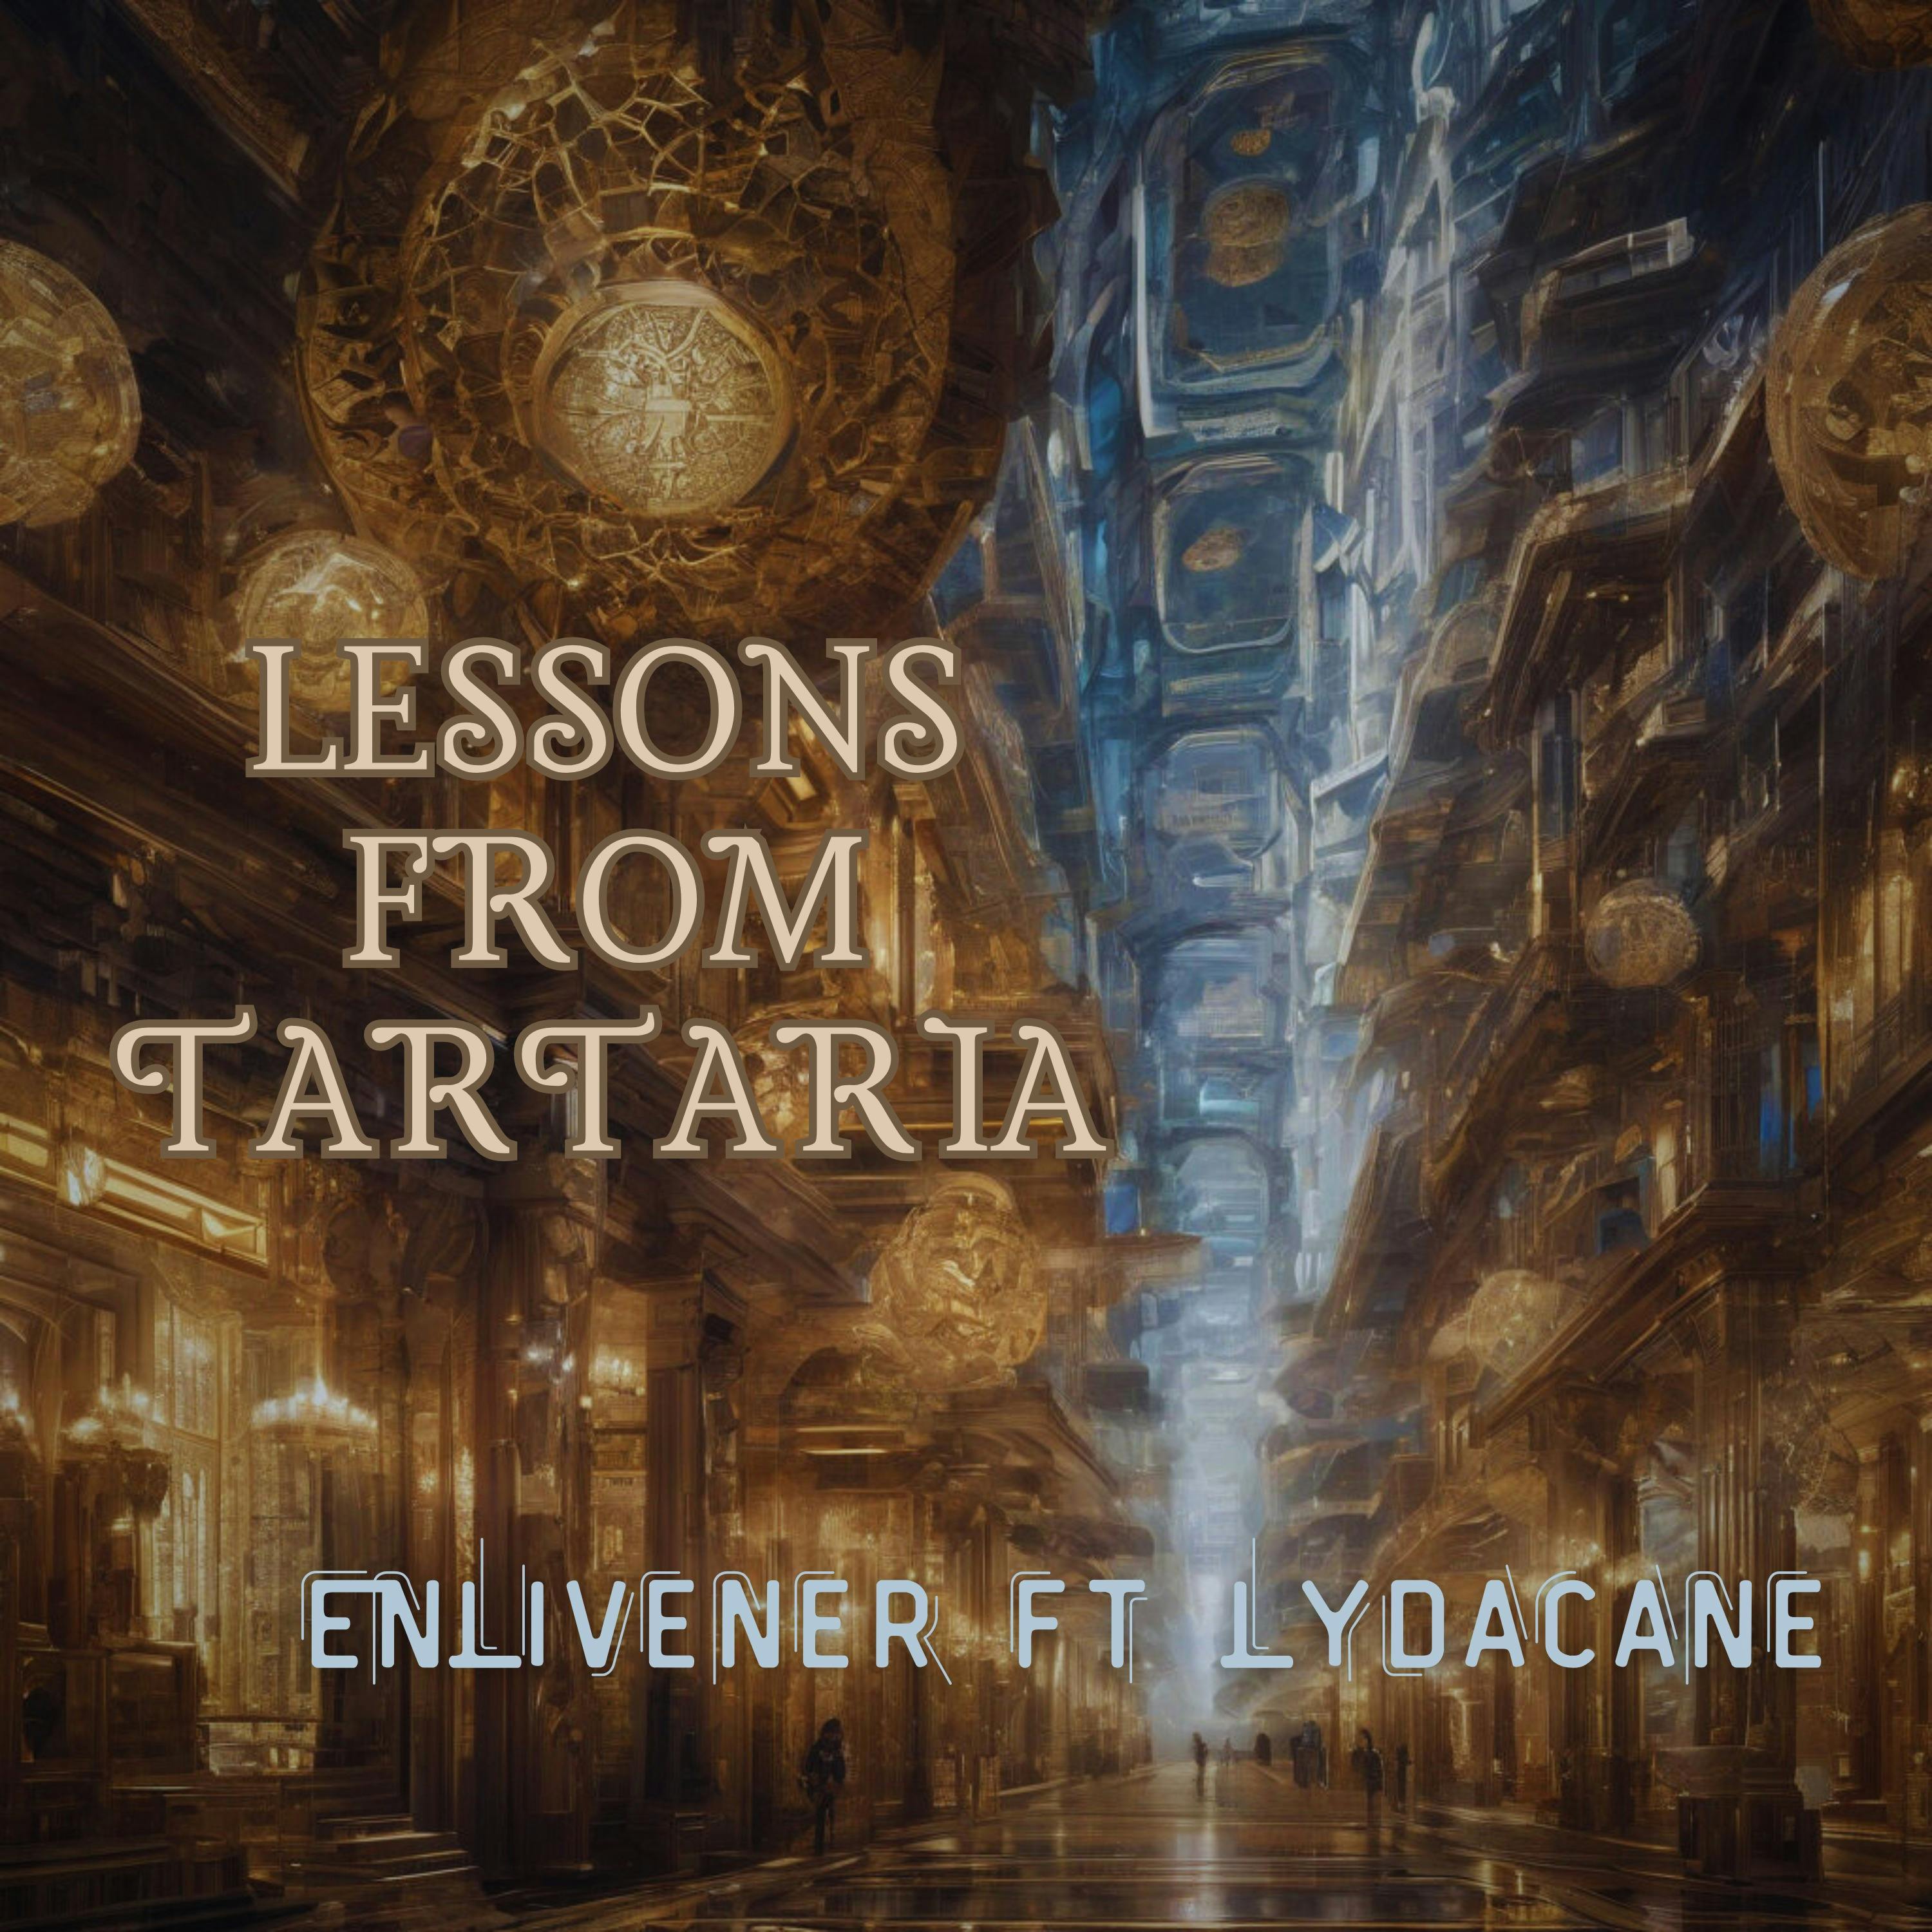 Lessons from Tartaria